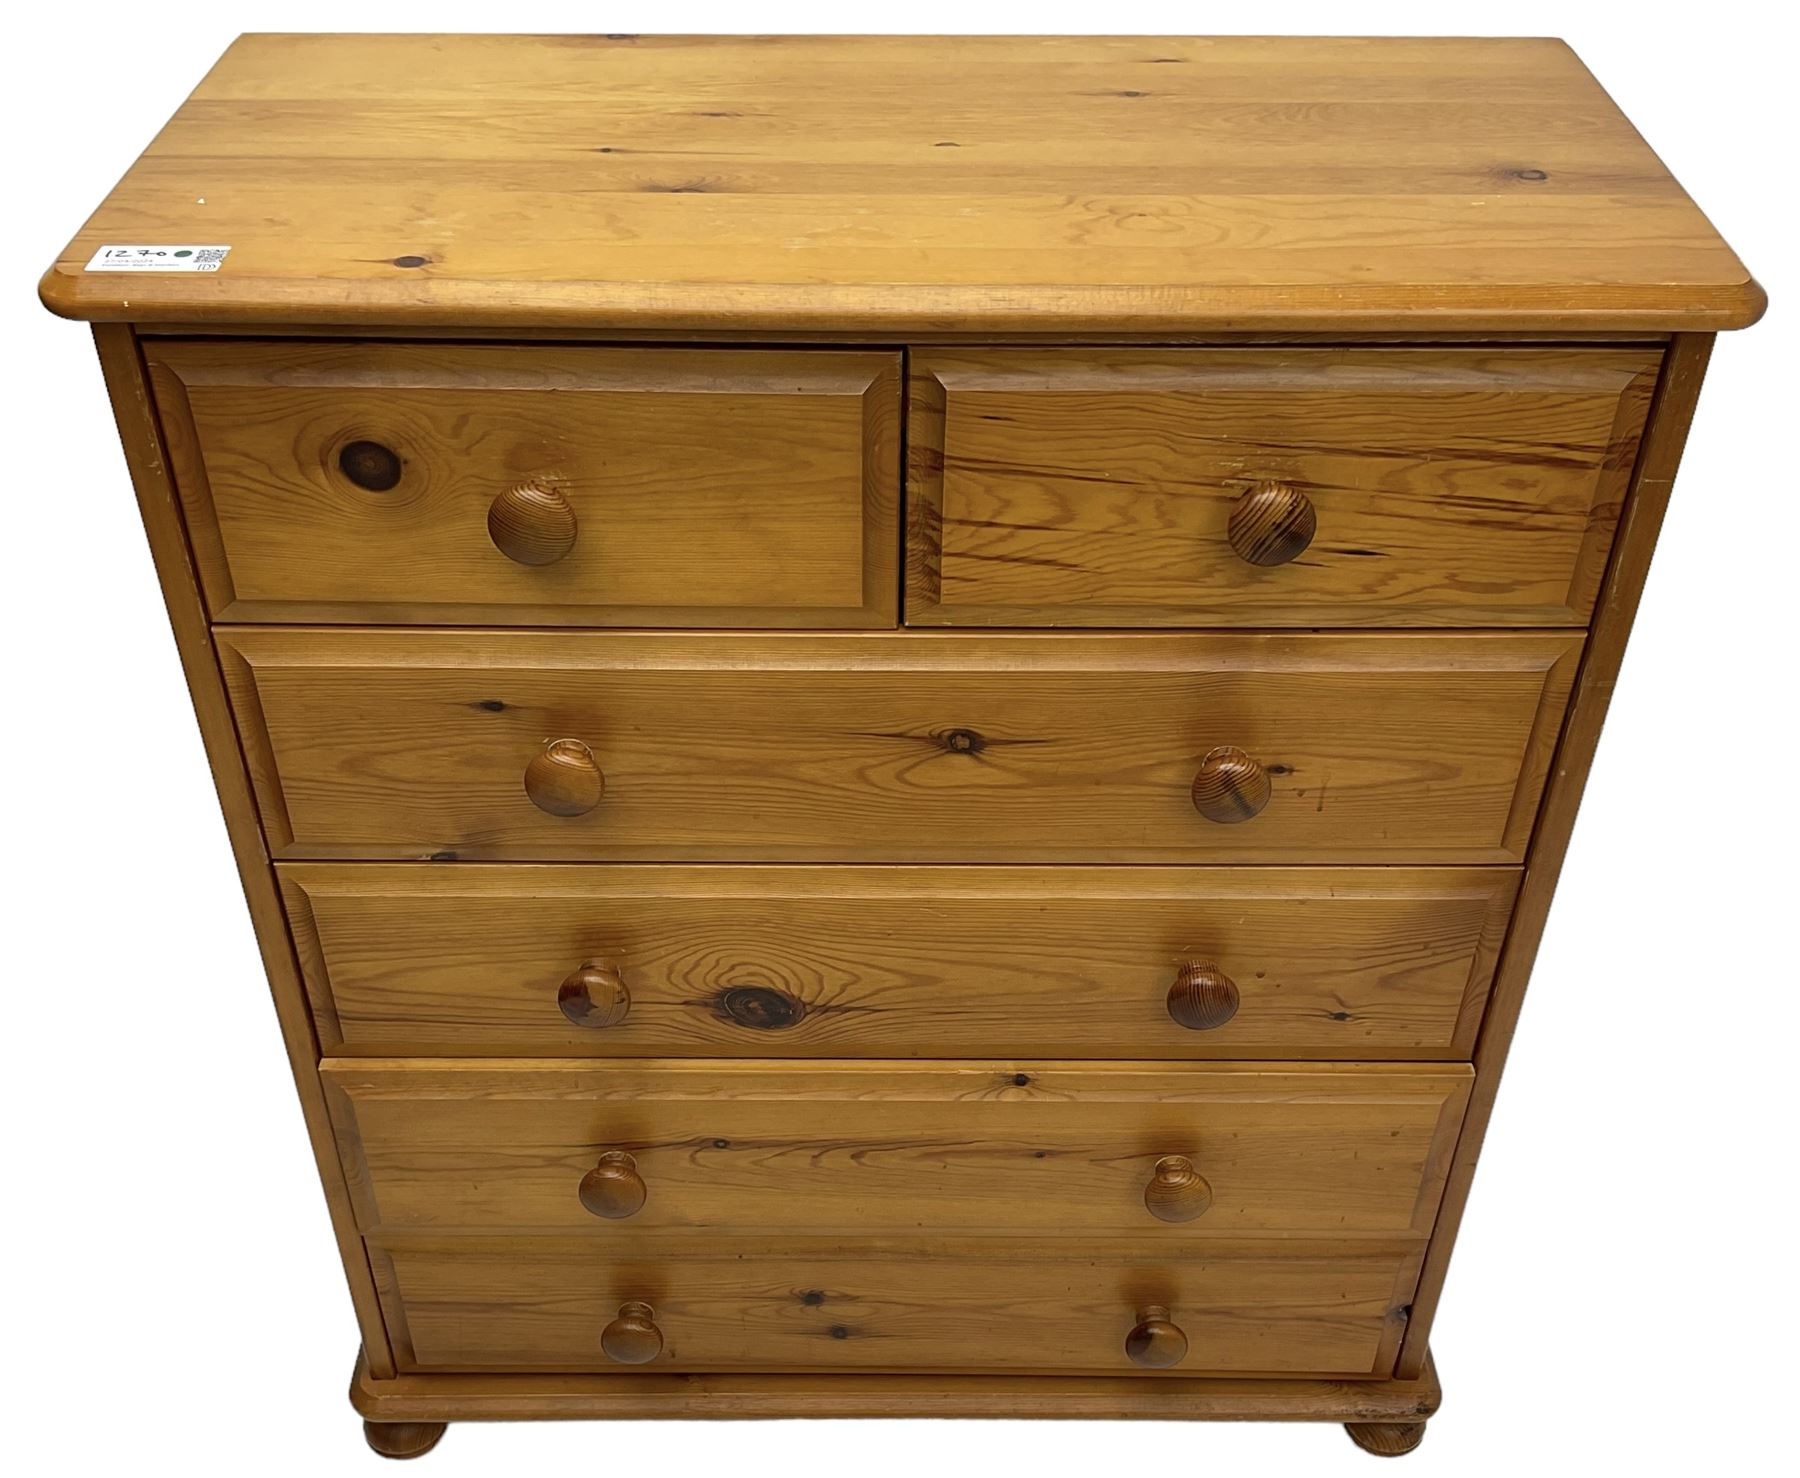 Polished pine chest - Image 9 of 12